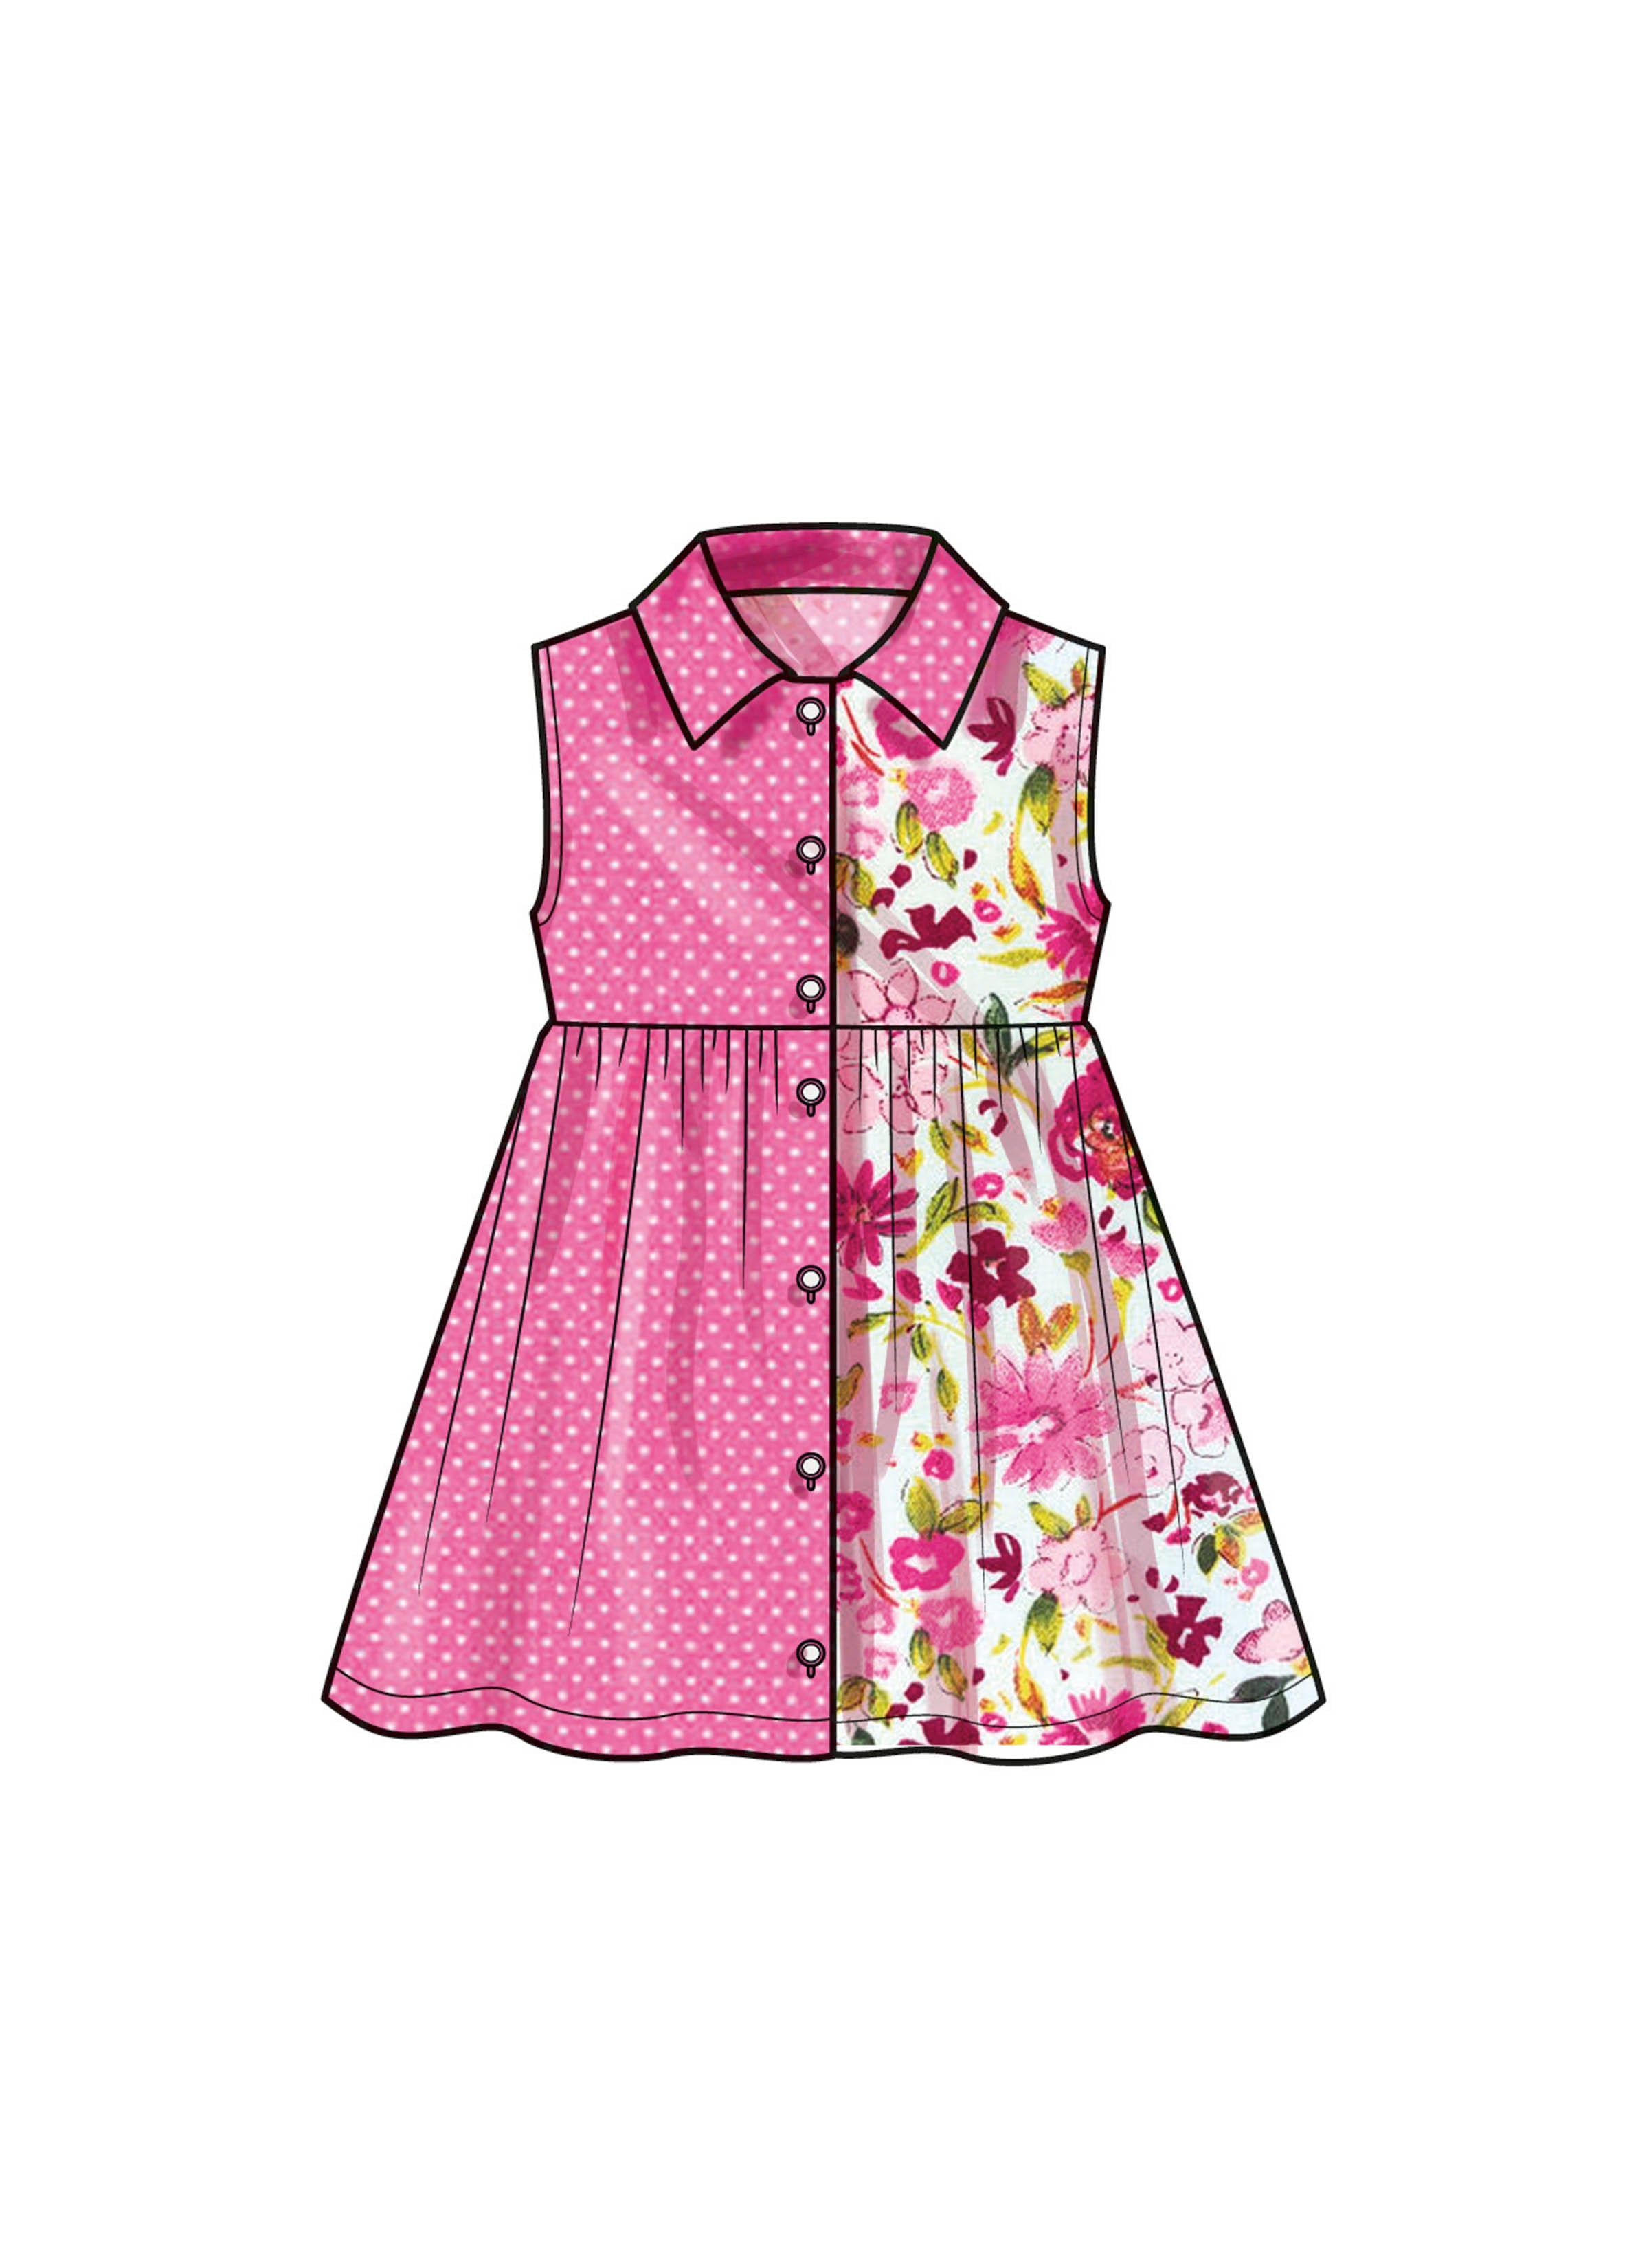 Simplicity 9760 sewing pattern Toddlers' Dress with Sleeve Variations from Jaycotts Sewing Supplies